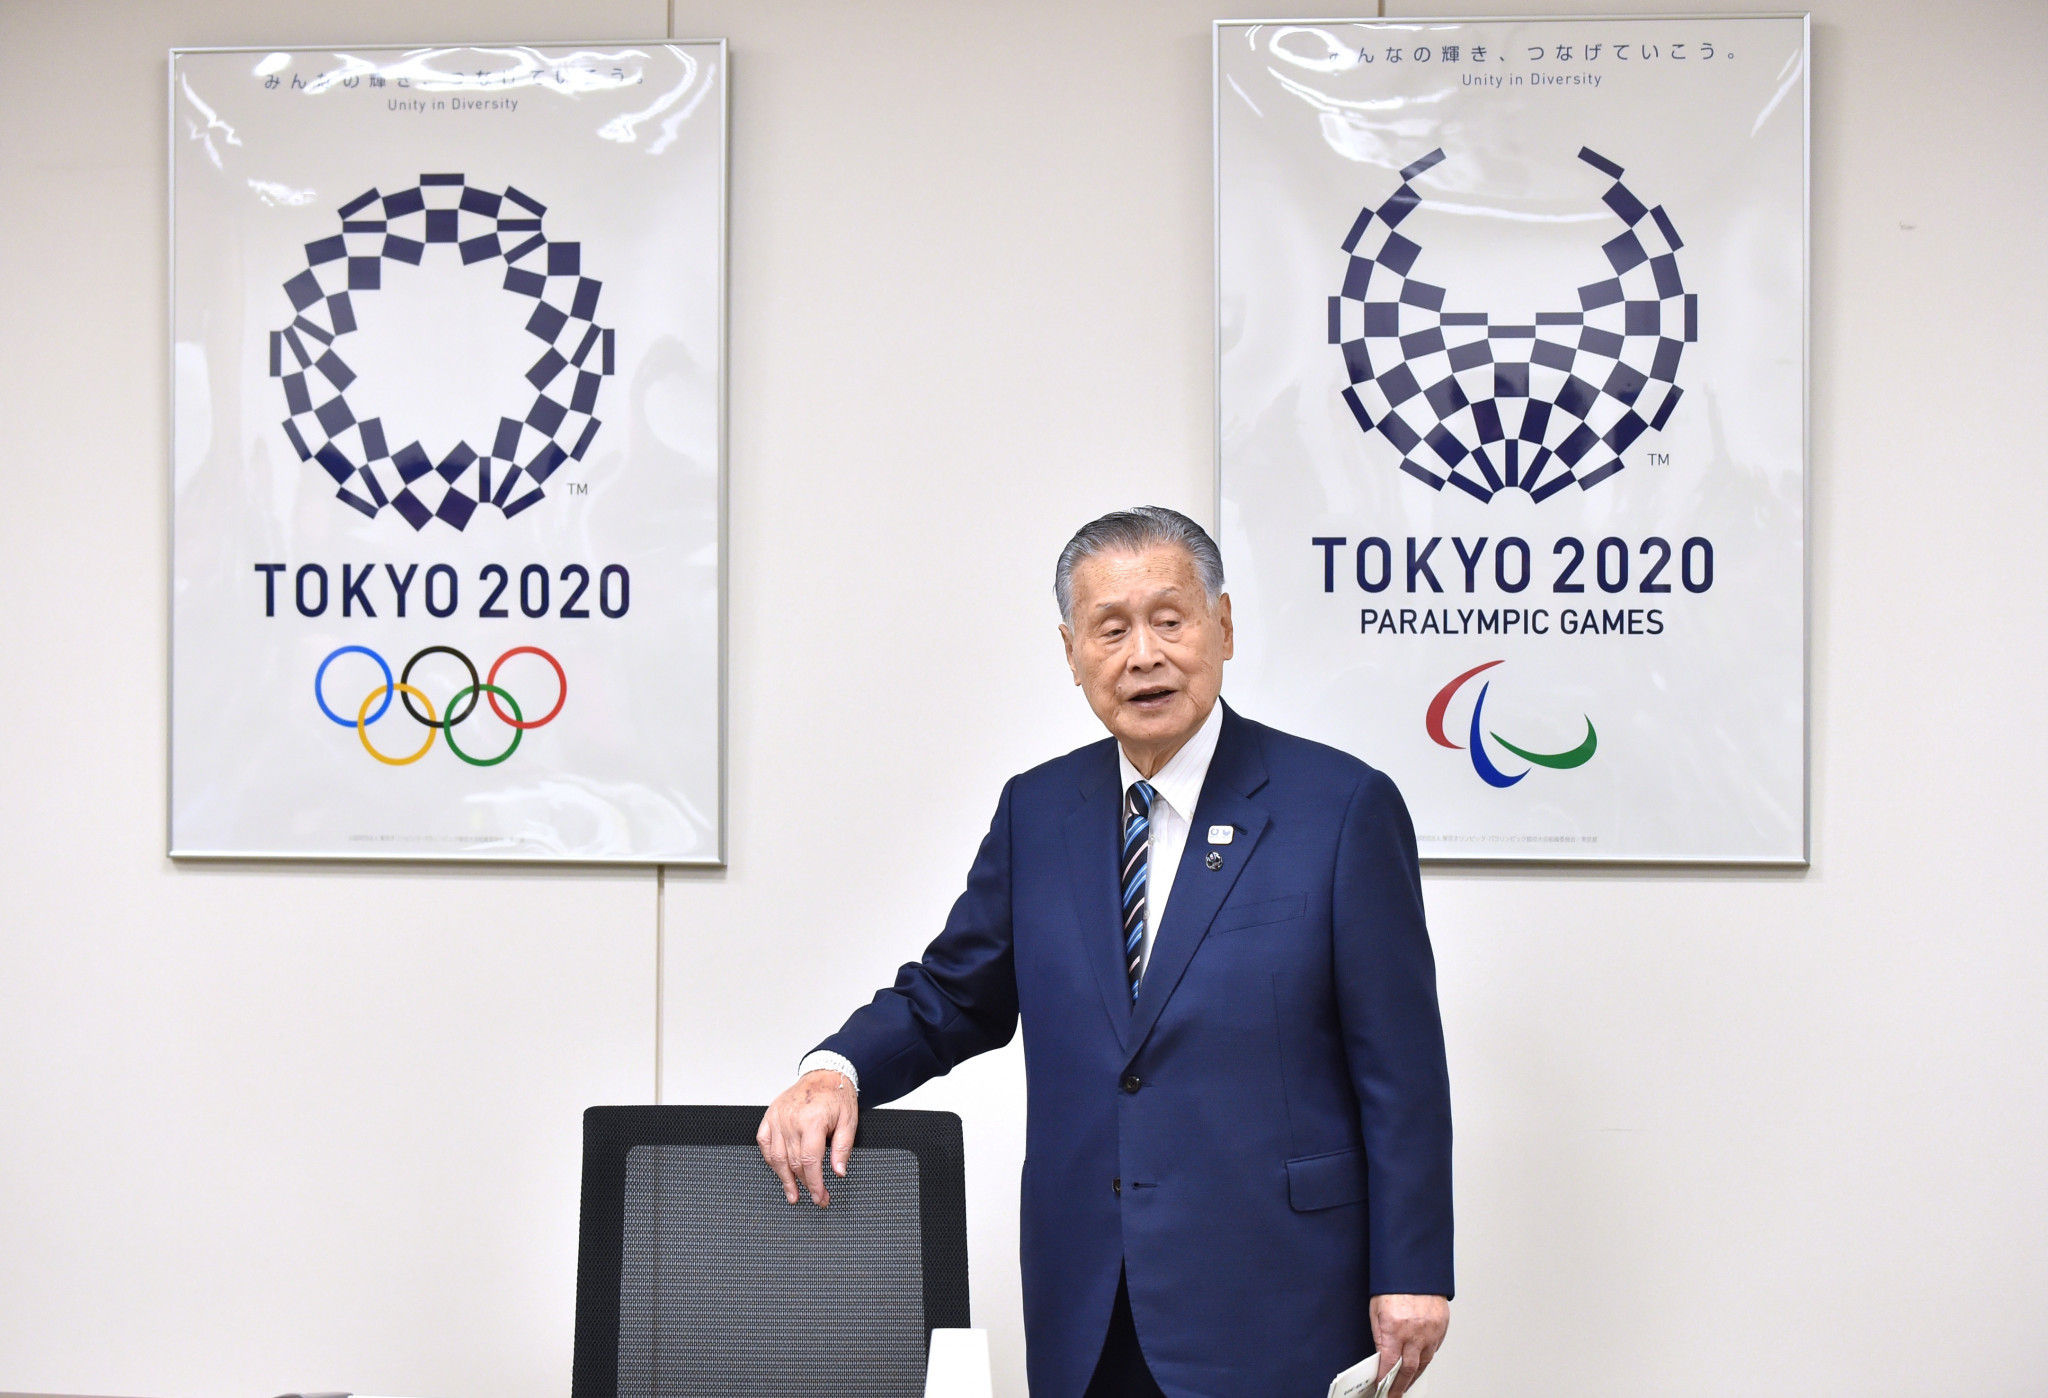 Tokyo 2020 President Yoshirō Mori claimed last month that budget reduction remains the 